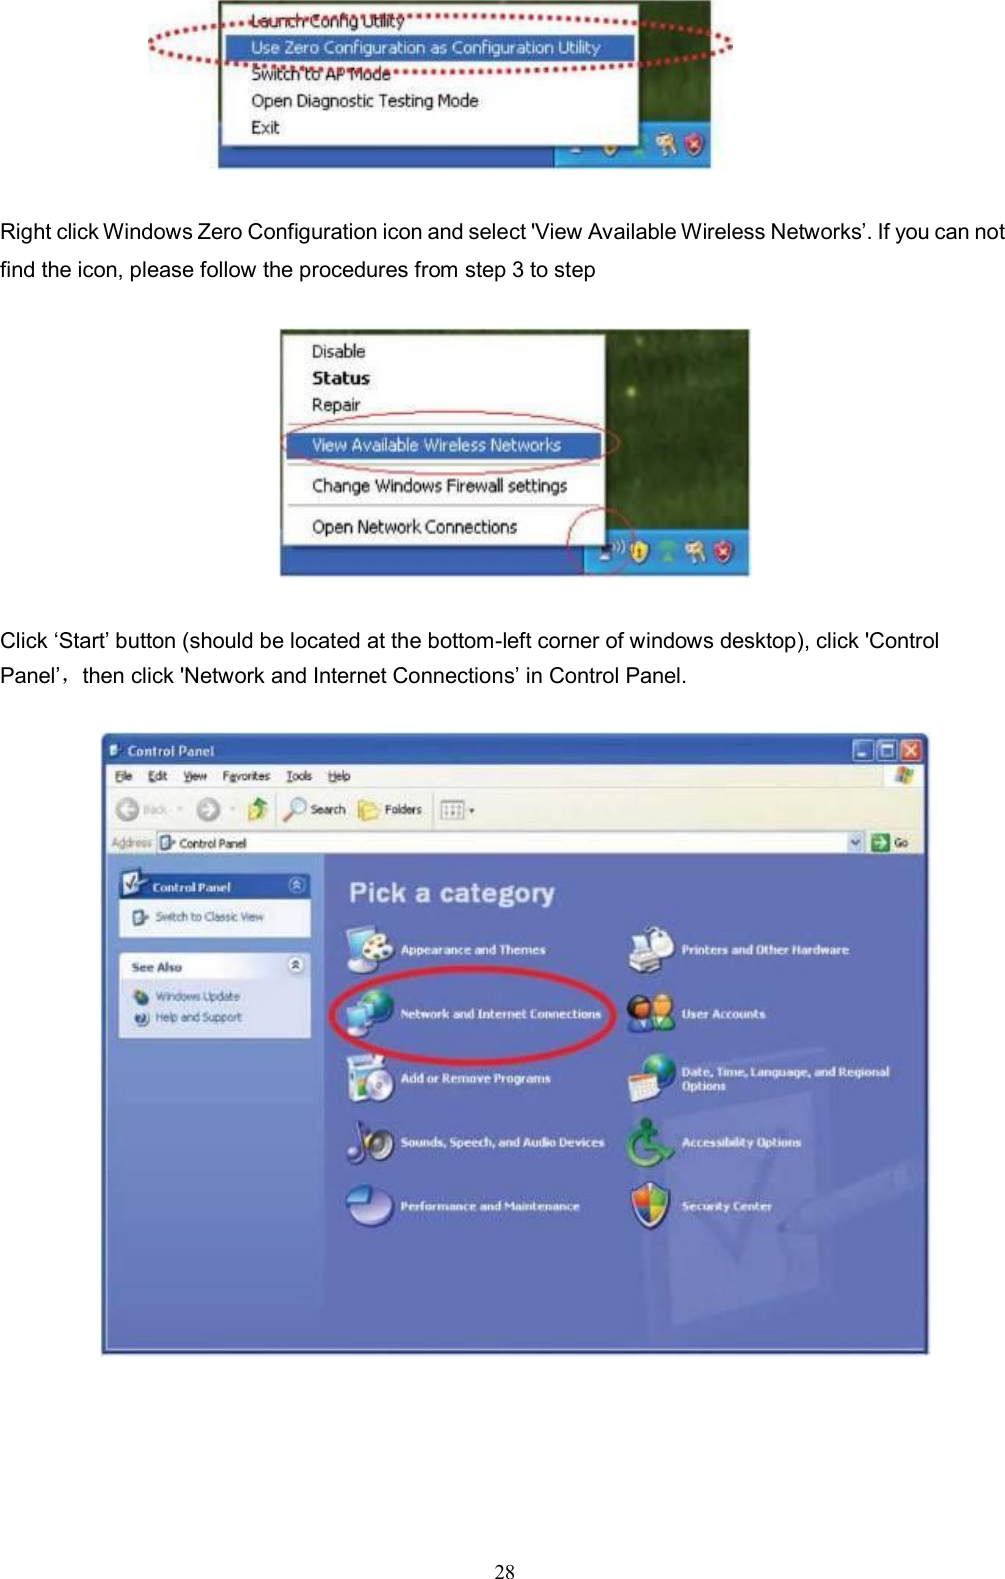 28   Right click Windows Zero Configuration icon and select &apos;View Available Wireless Networks’. If you can not find the icon, please follow the procedures from step 3 to step  Click ‘Start’ button (should be located at the bottom-left corner of windows desktop), click &apos;Control Panel’，then click &apos;Network and Internet Connections’ in Control Panel.    